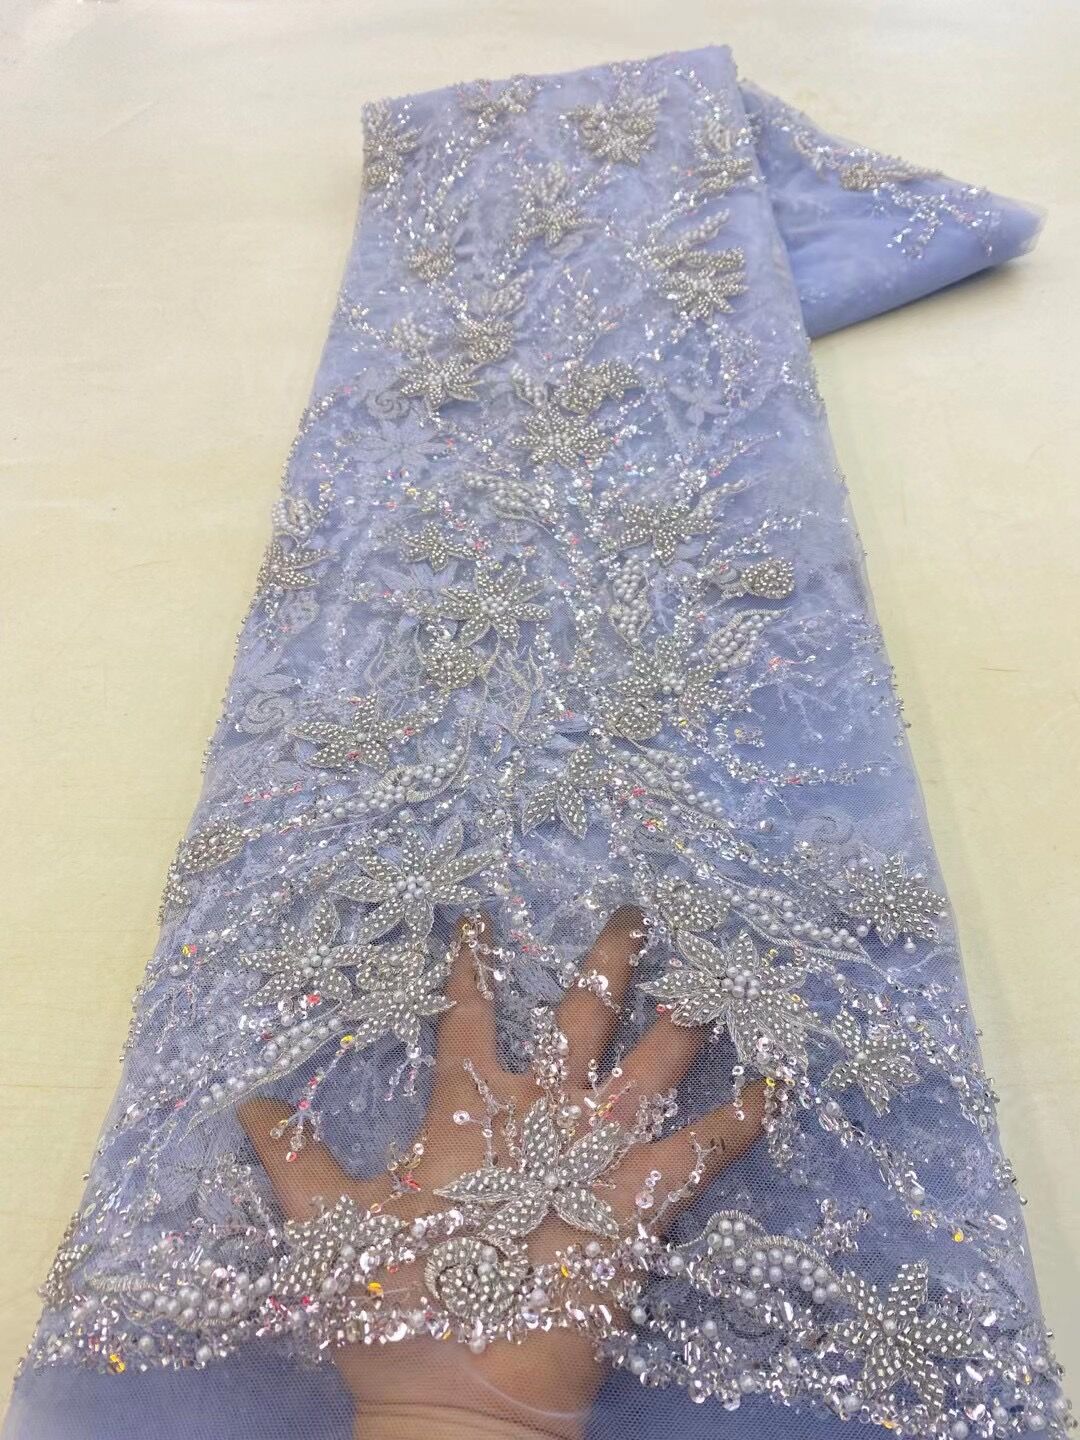 5 YARDS / 8 COLORS / Brielle Sequin Beaded Embroidered  Mesh Sparkly Lace Bridal Wedding Party Dress Fabric